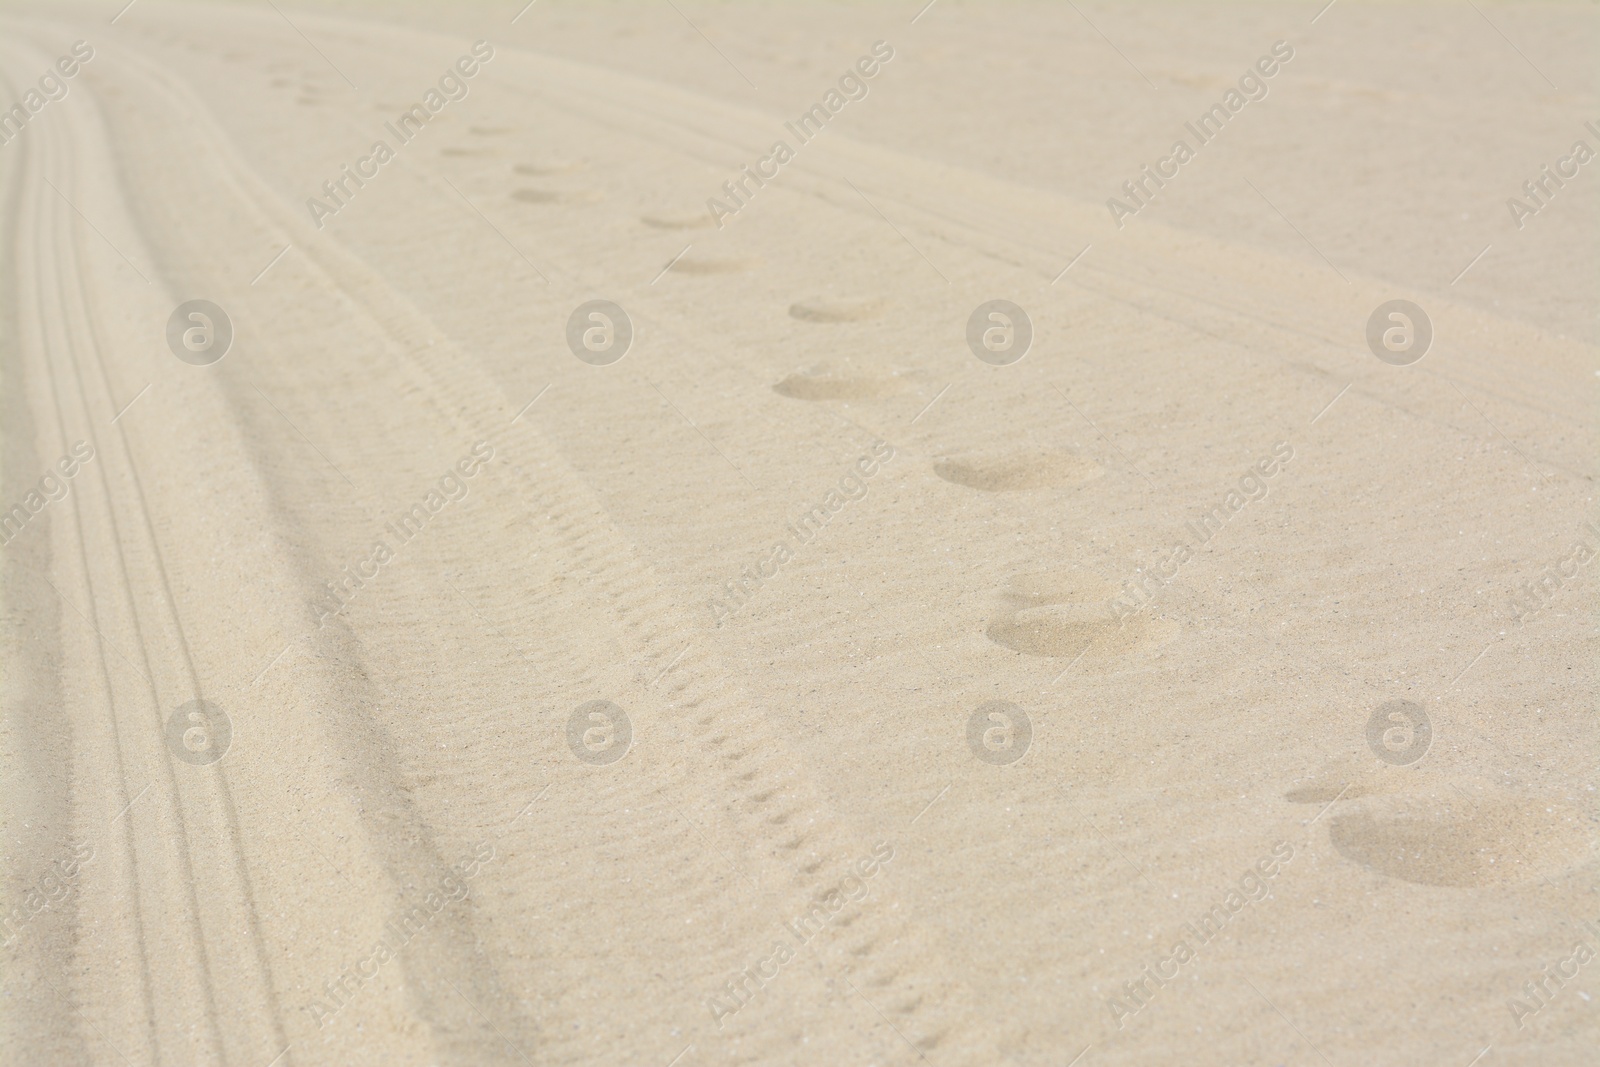 Photo of Dry beach sand with track of car as background, closeup